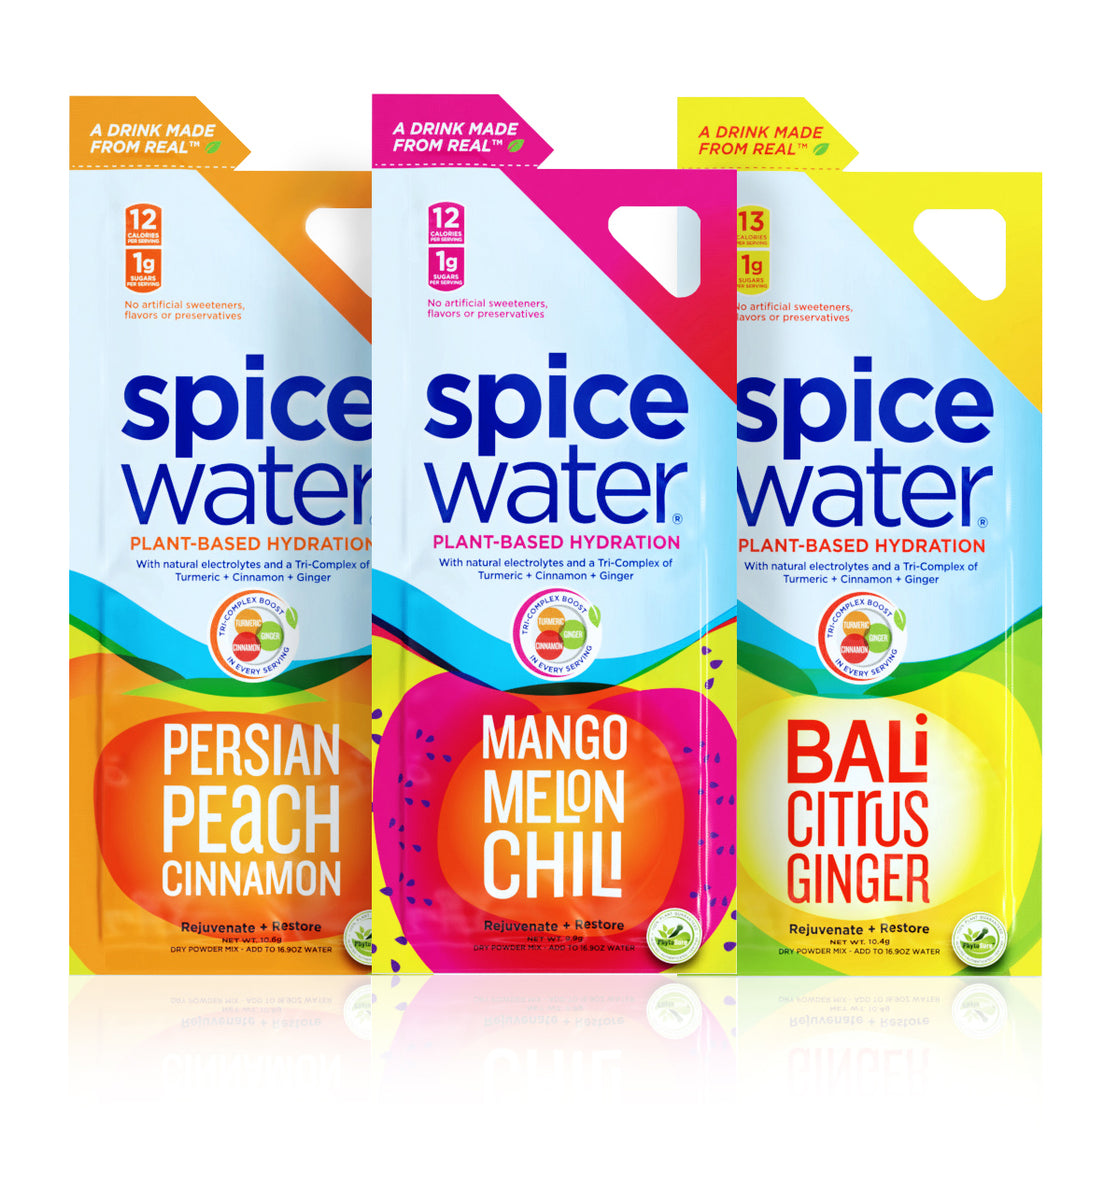 Spicewater® single-serve pouches and packets for on-the-go lifestyle. Three flavors, Bali Citrus Ginger, Persian Peach Cinnamon, and Mango Melon Chili. All are low calorie, low sugars, packed with nutrients and health benefits.